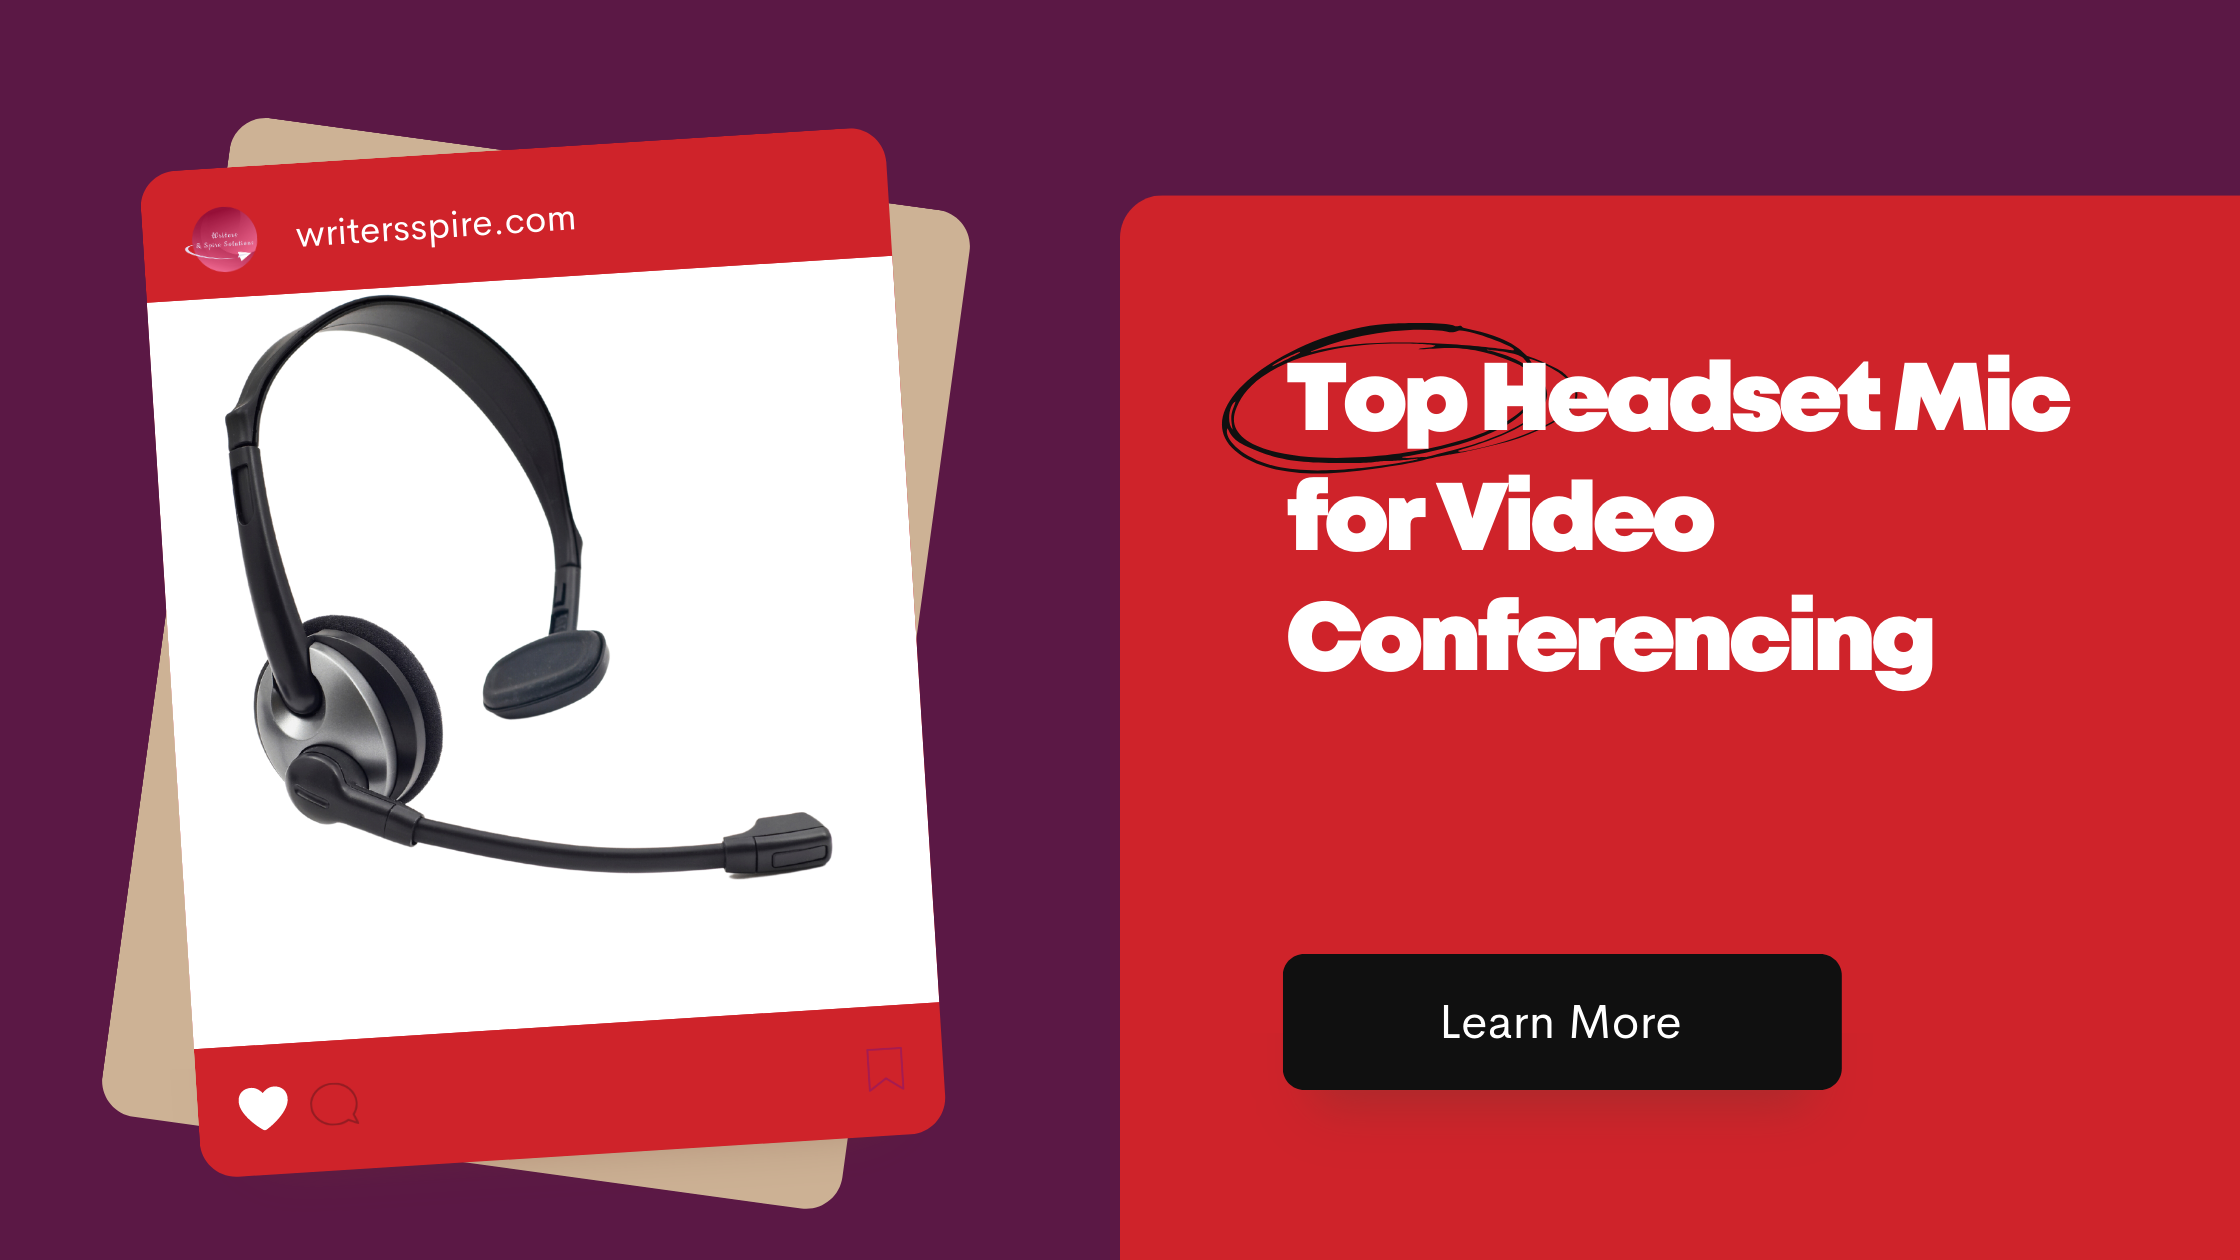 Top Headset Mic for Video Conferencing